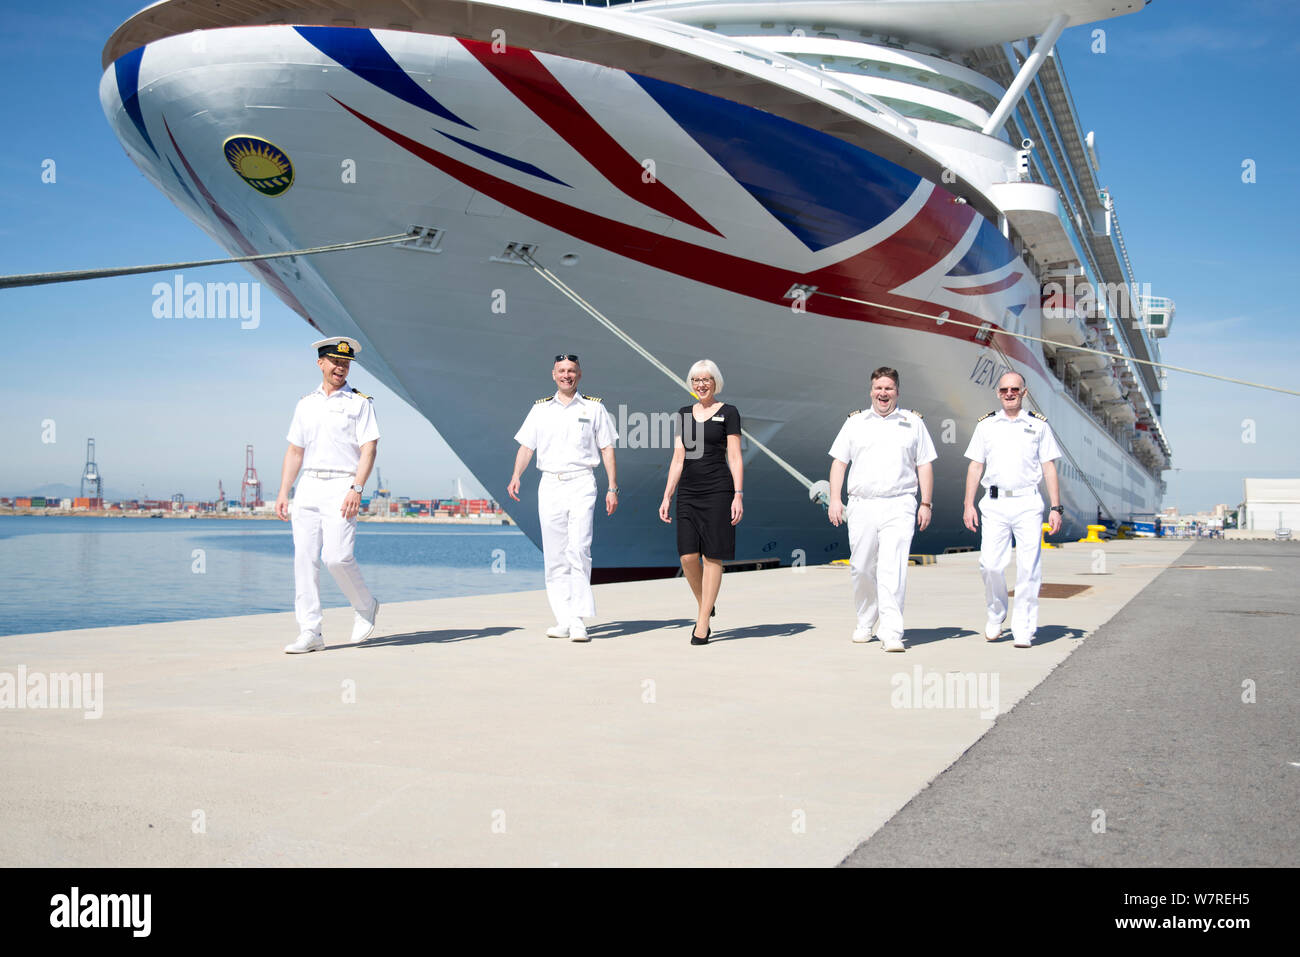 Photoshoot with senior management team of P&O Cruises ship mv Ventura showing officers and exterior view of cruise ship Stock Photo